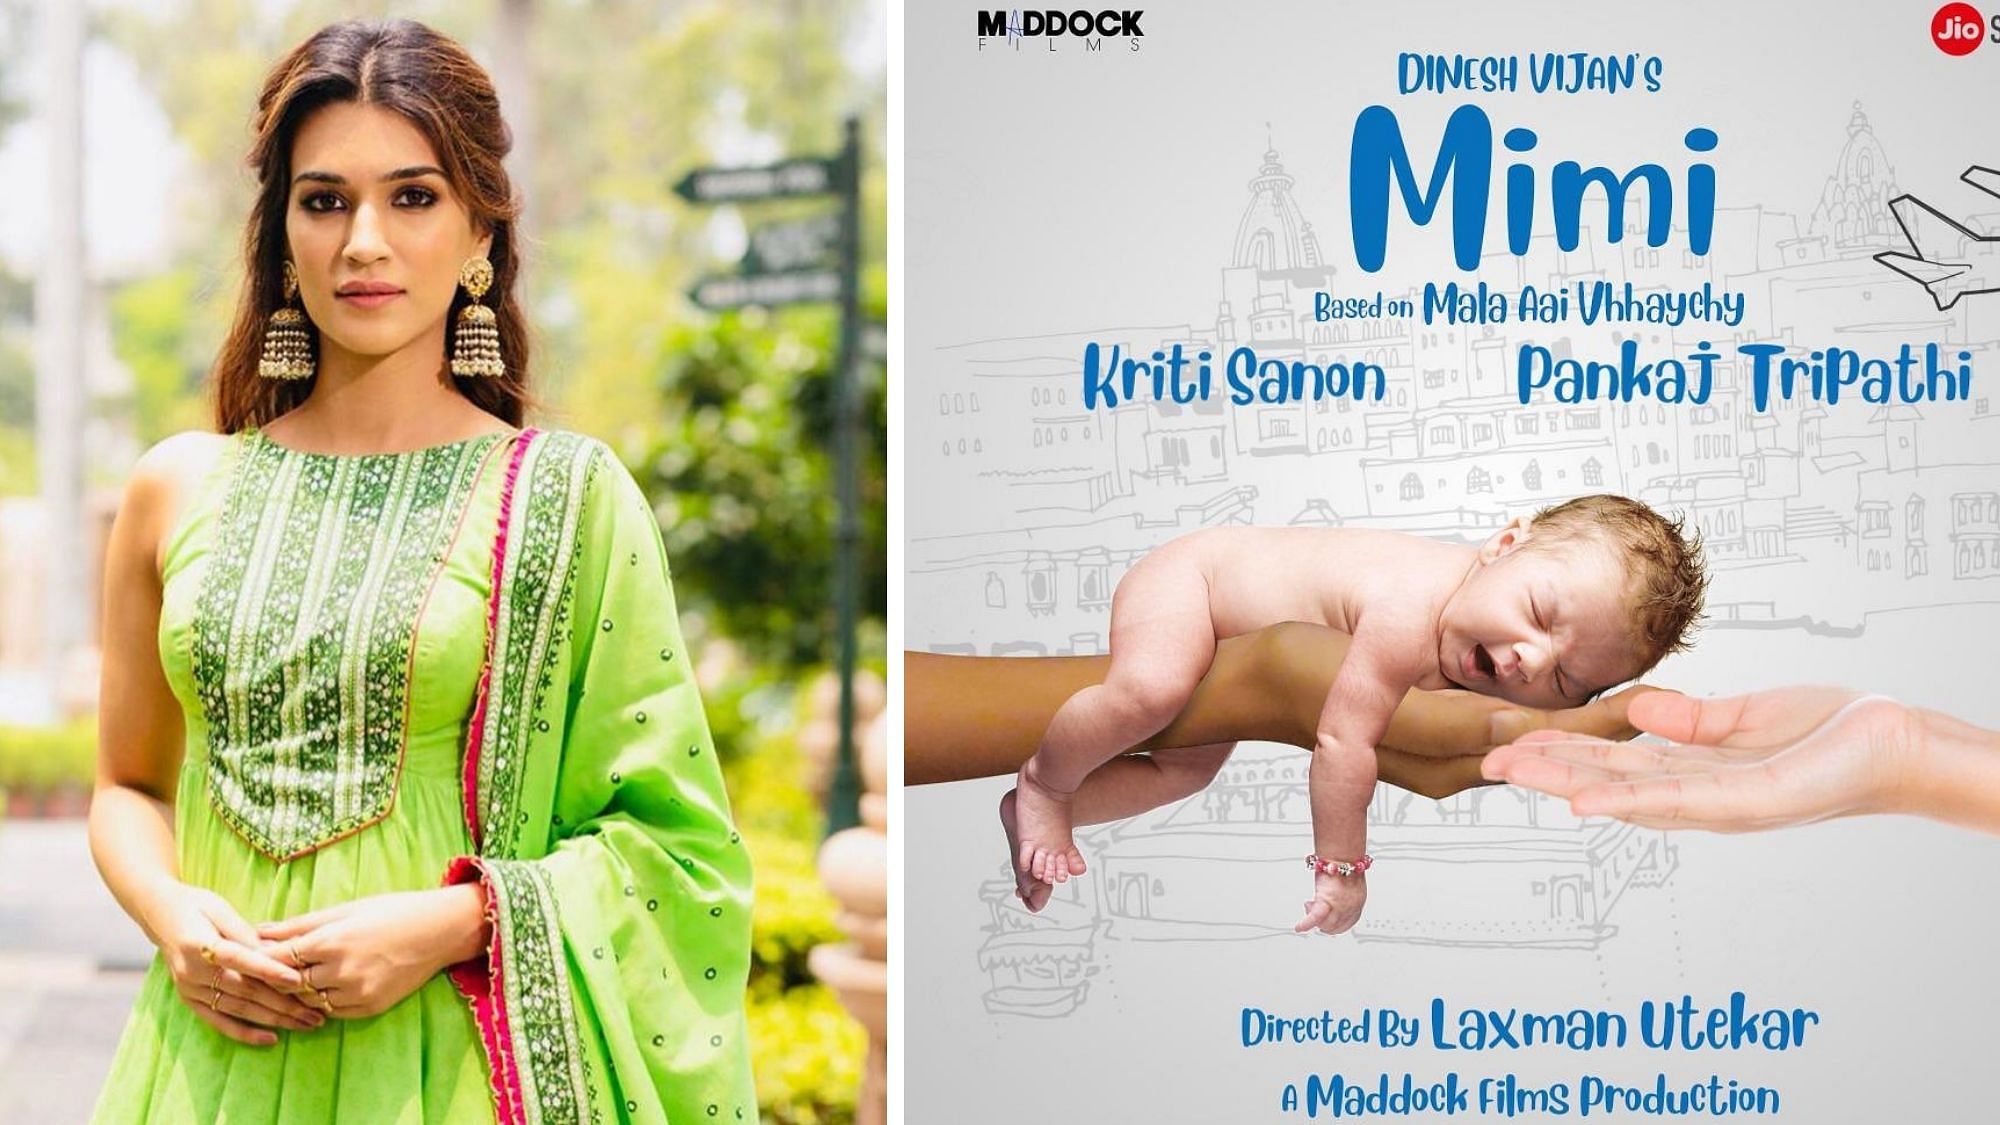 Kriti Sanon shares the poster from her upcoming film <i>Mimi</i>.